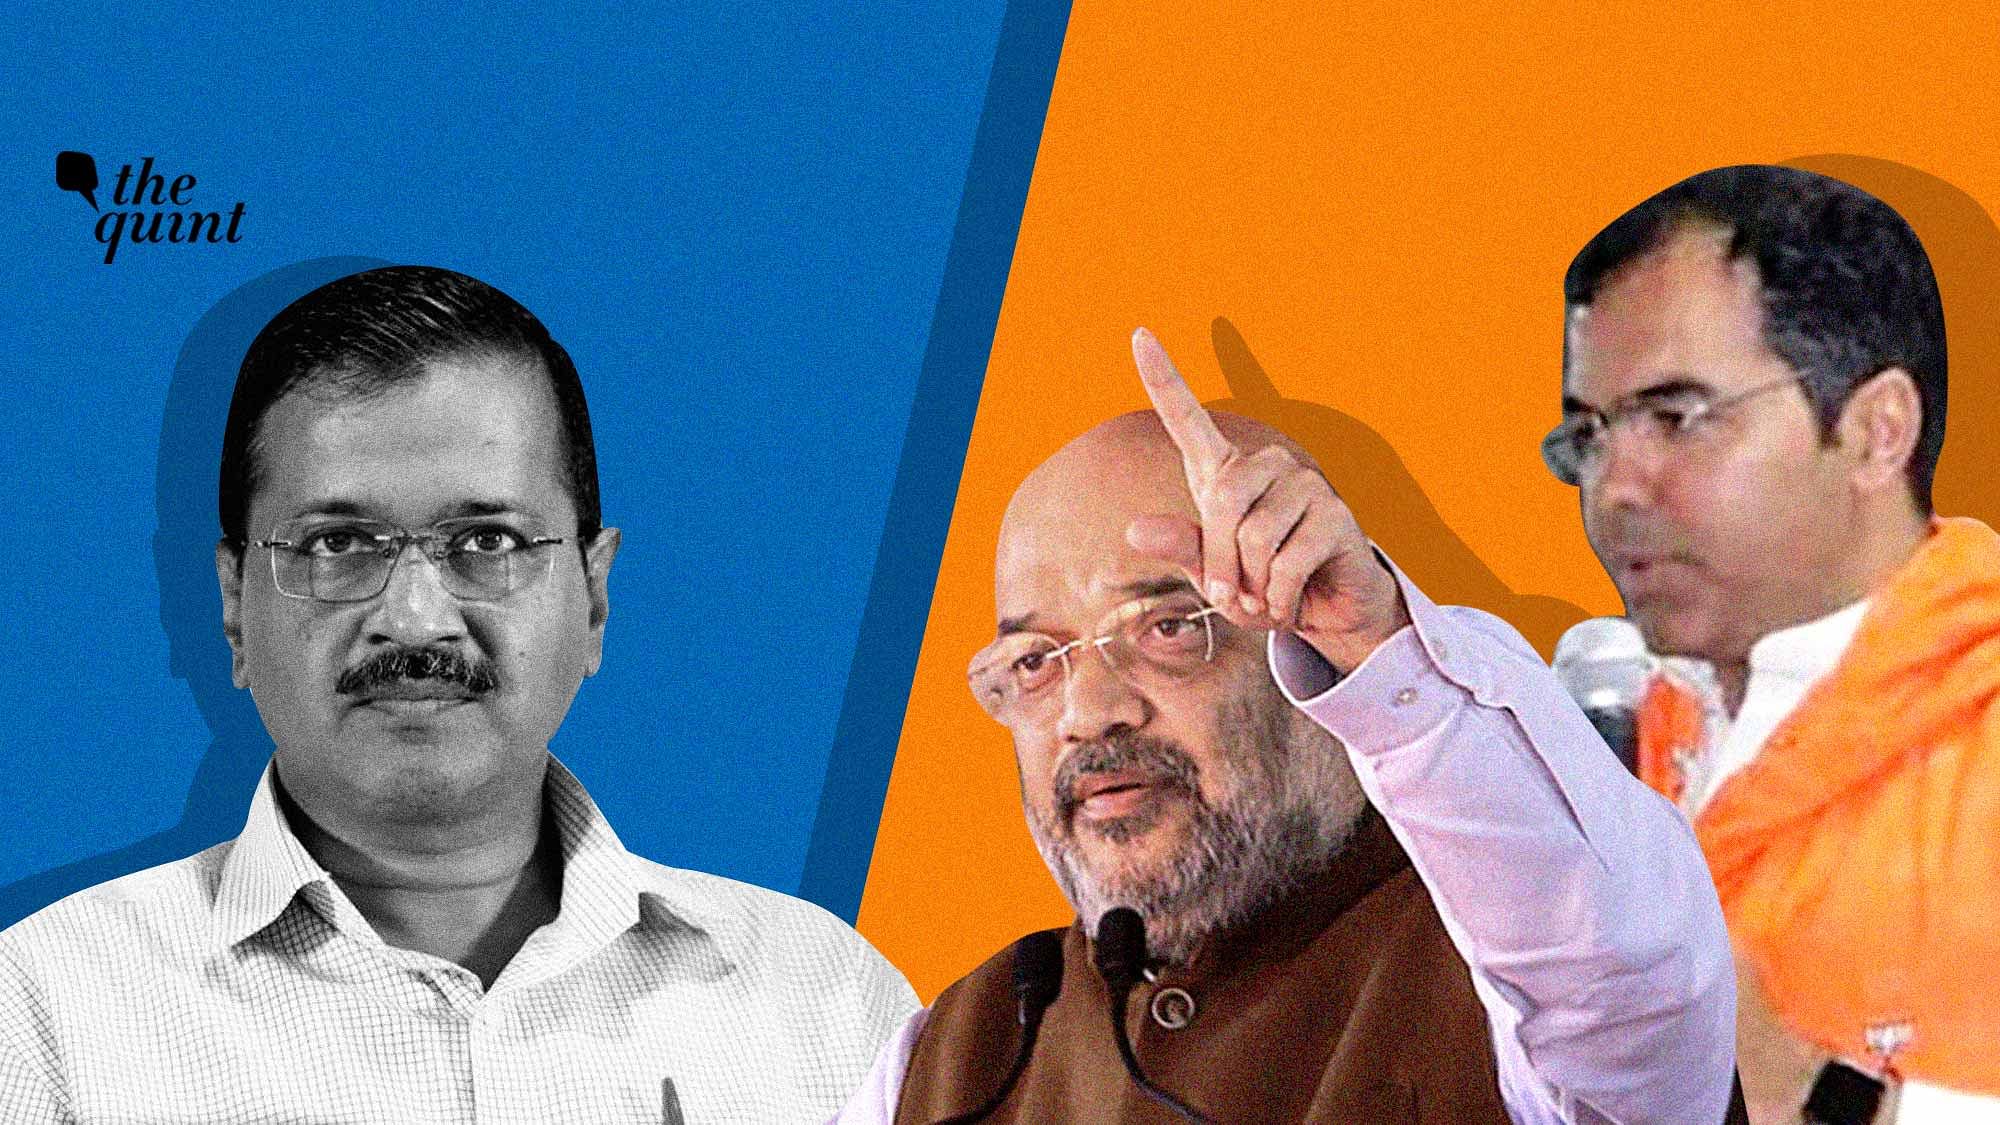 BJP’s Amit Shah and Parvesh Verma have launched a communally charged attack against Arvind Kejriwal.